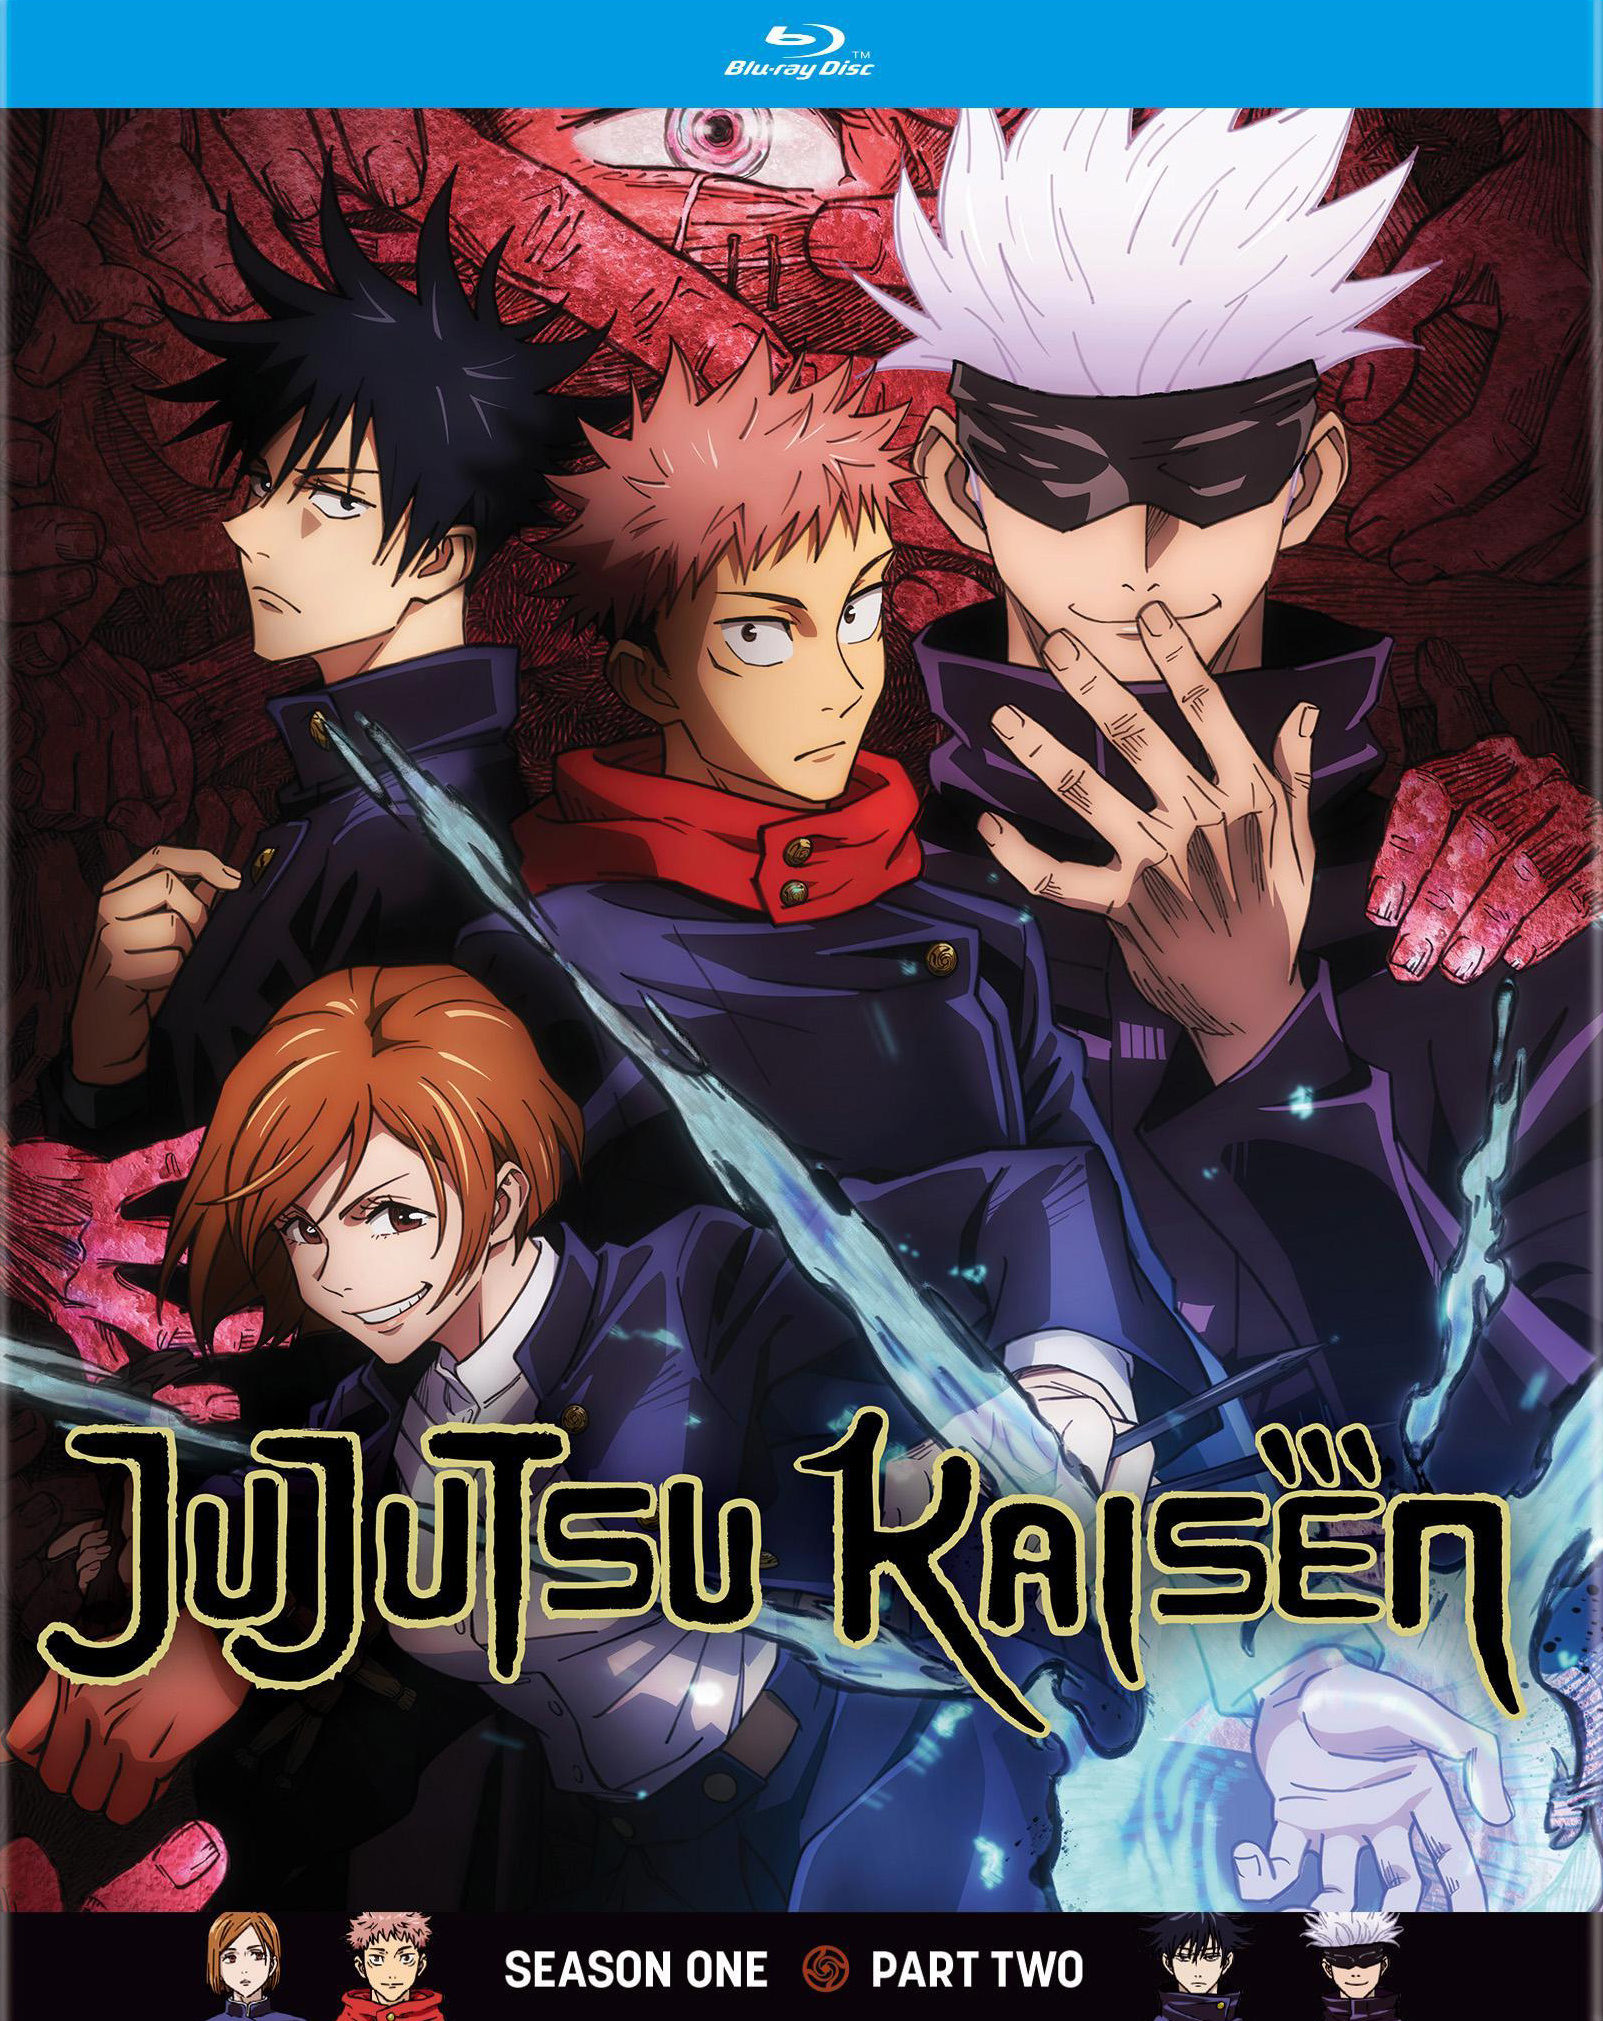 Jujutsu Kaisen 0 Blu-ray Release Date & Special Features